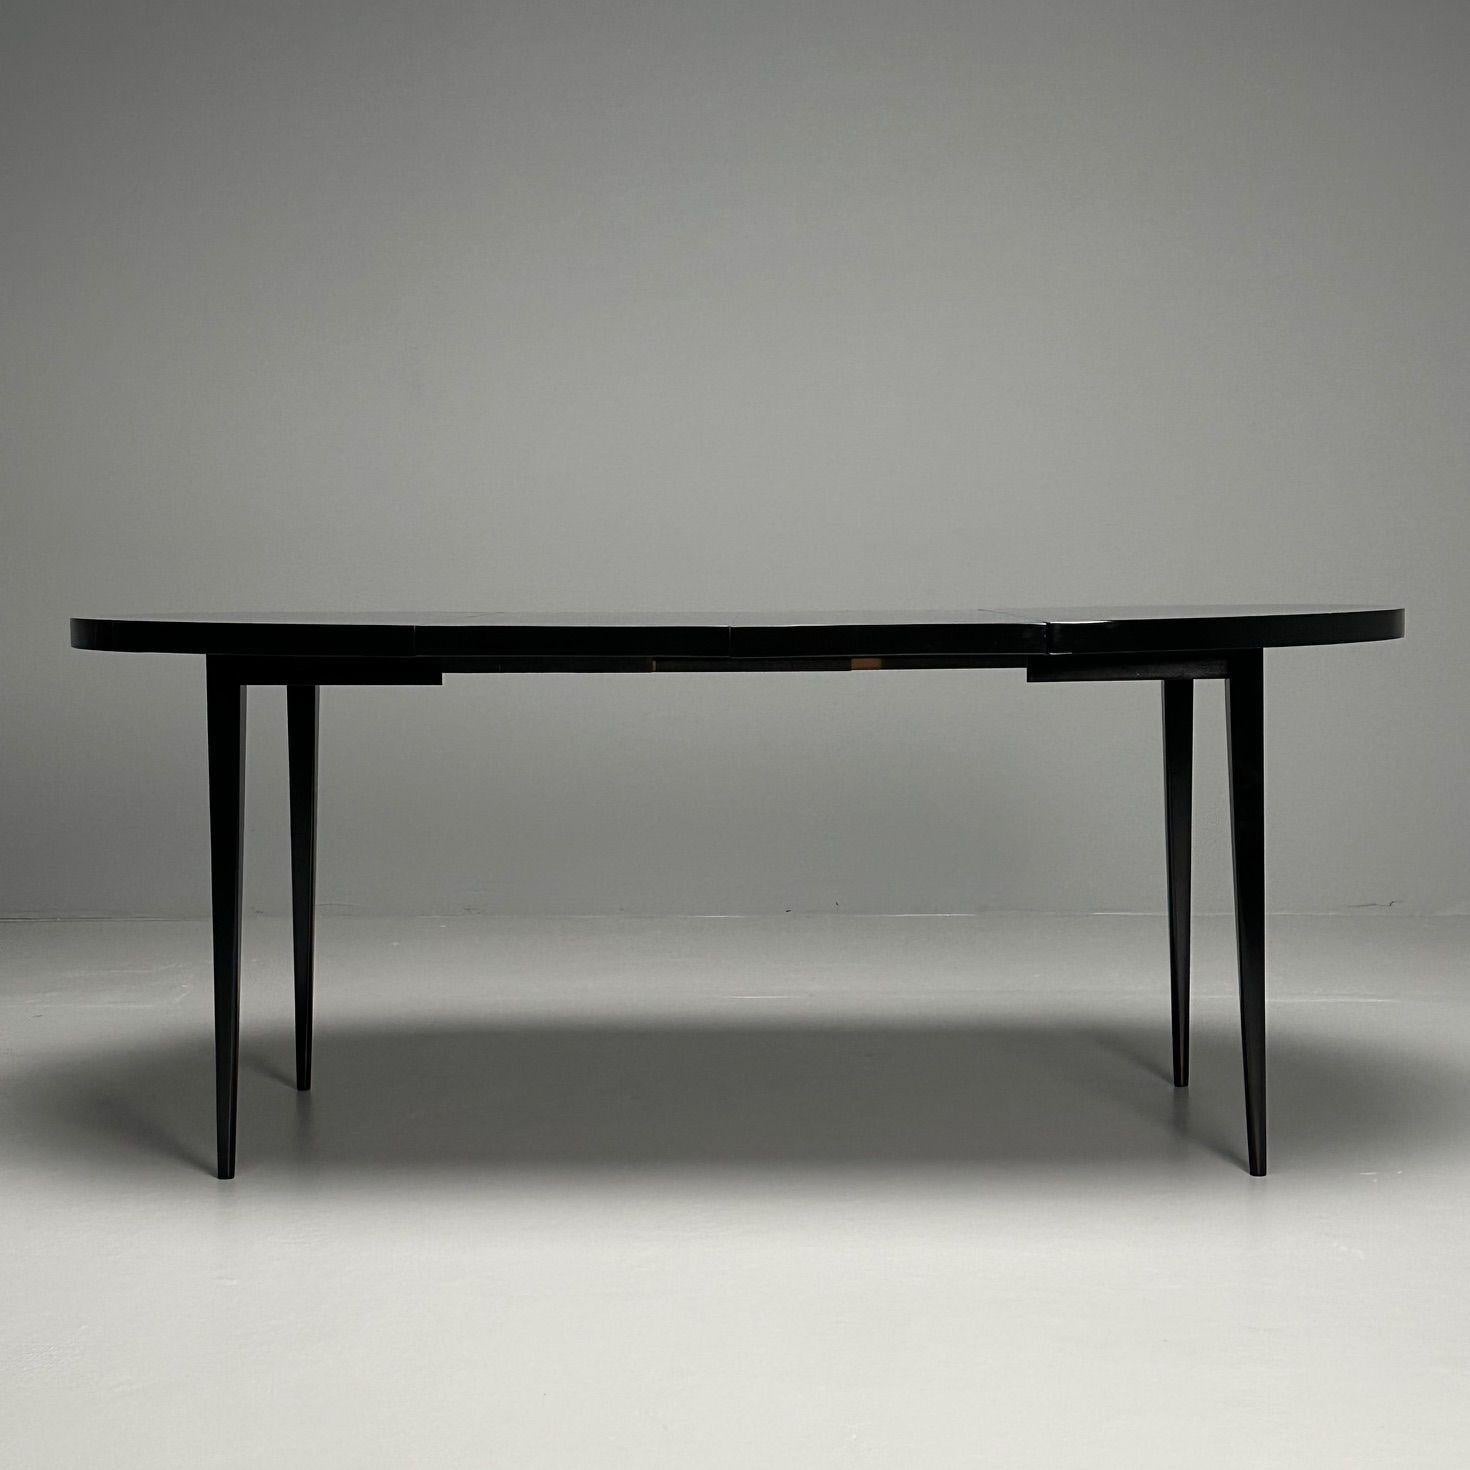 Paul McCobb, Mid-Century Modern Planner Group Dining Table, Black Lacquer, 1950s For Sale 3